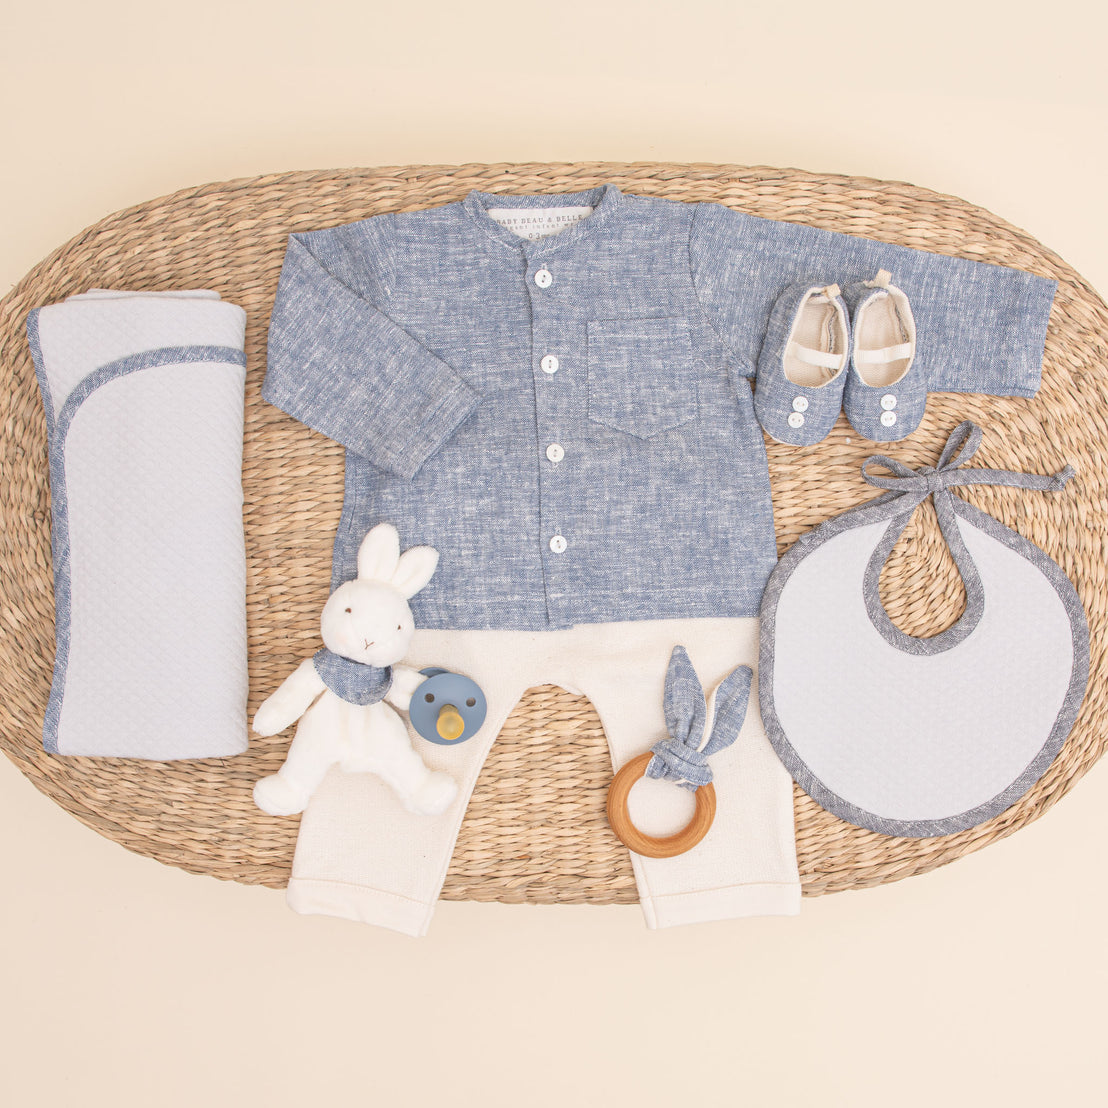 Flat lay photo of the indigo colored Silas Gift Set. Included in the photo is the shirt, pants, booties, bib, teether, bunny, pacifier, and personalized blanket.